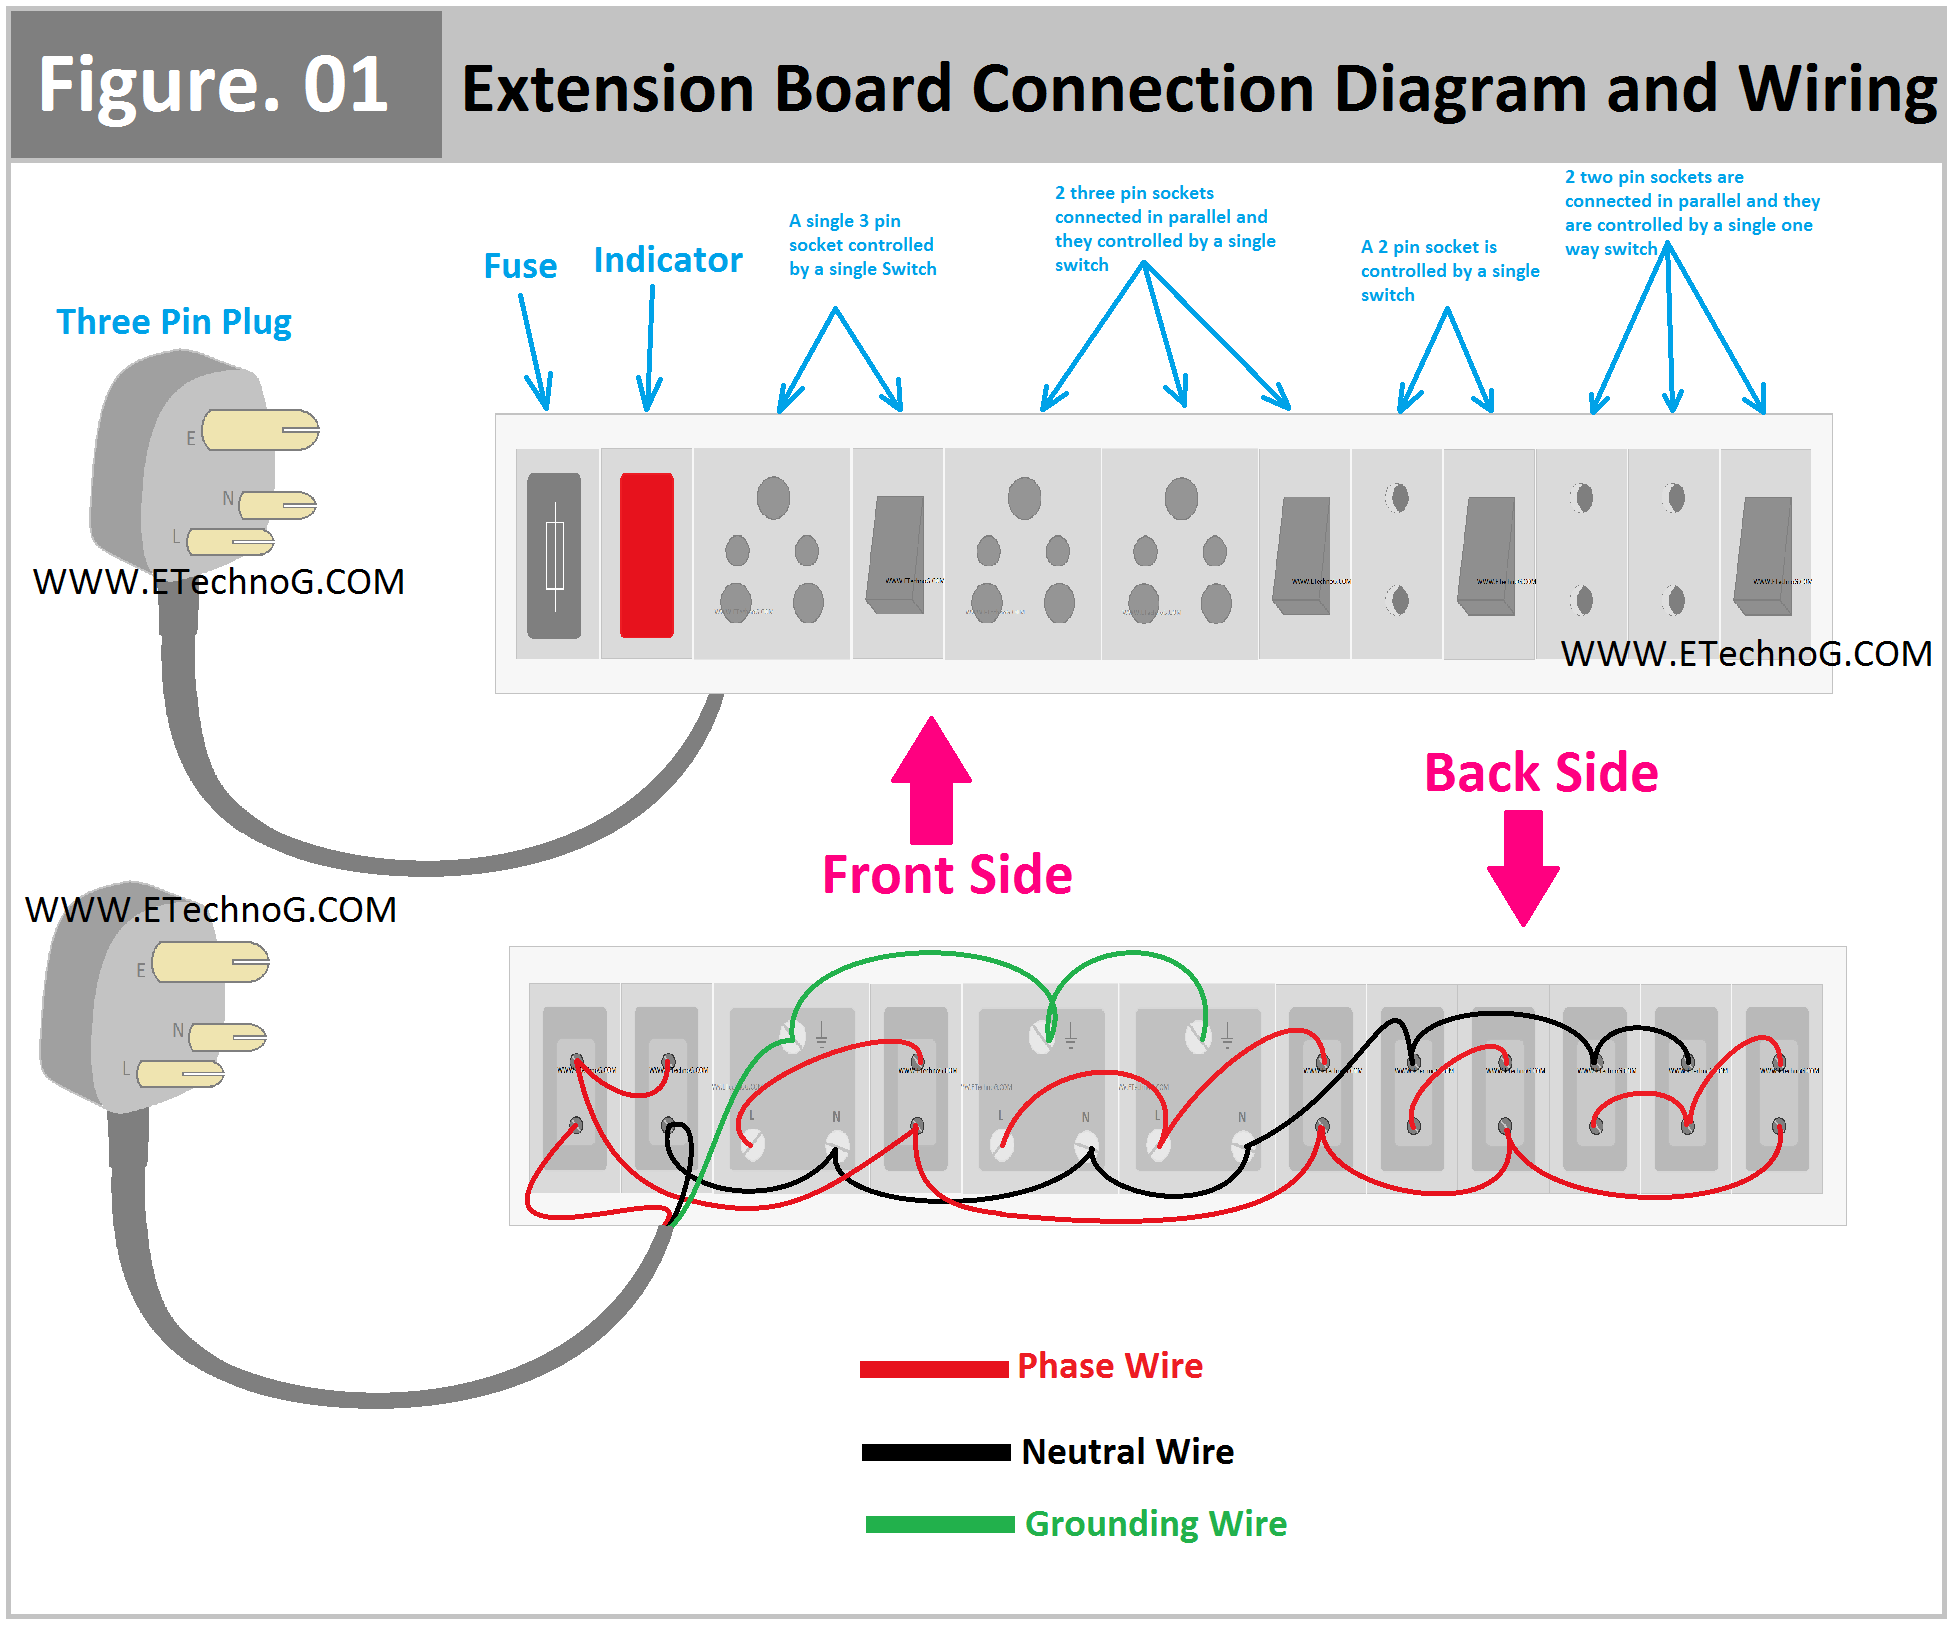 Extension Board Connection Diagram and Wiring